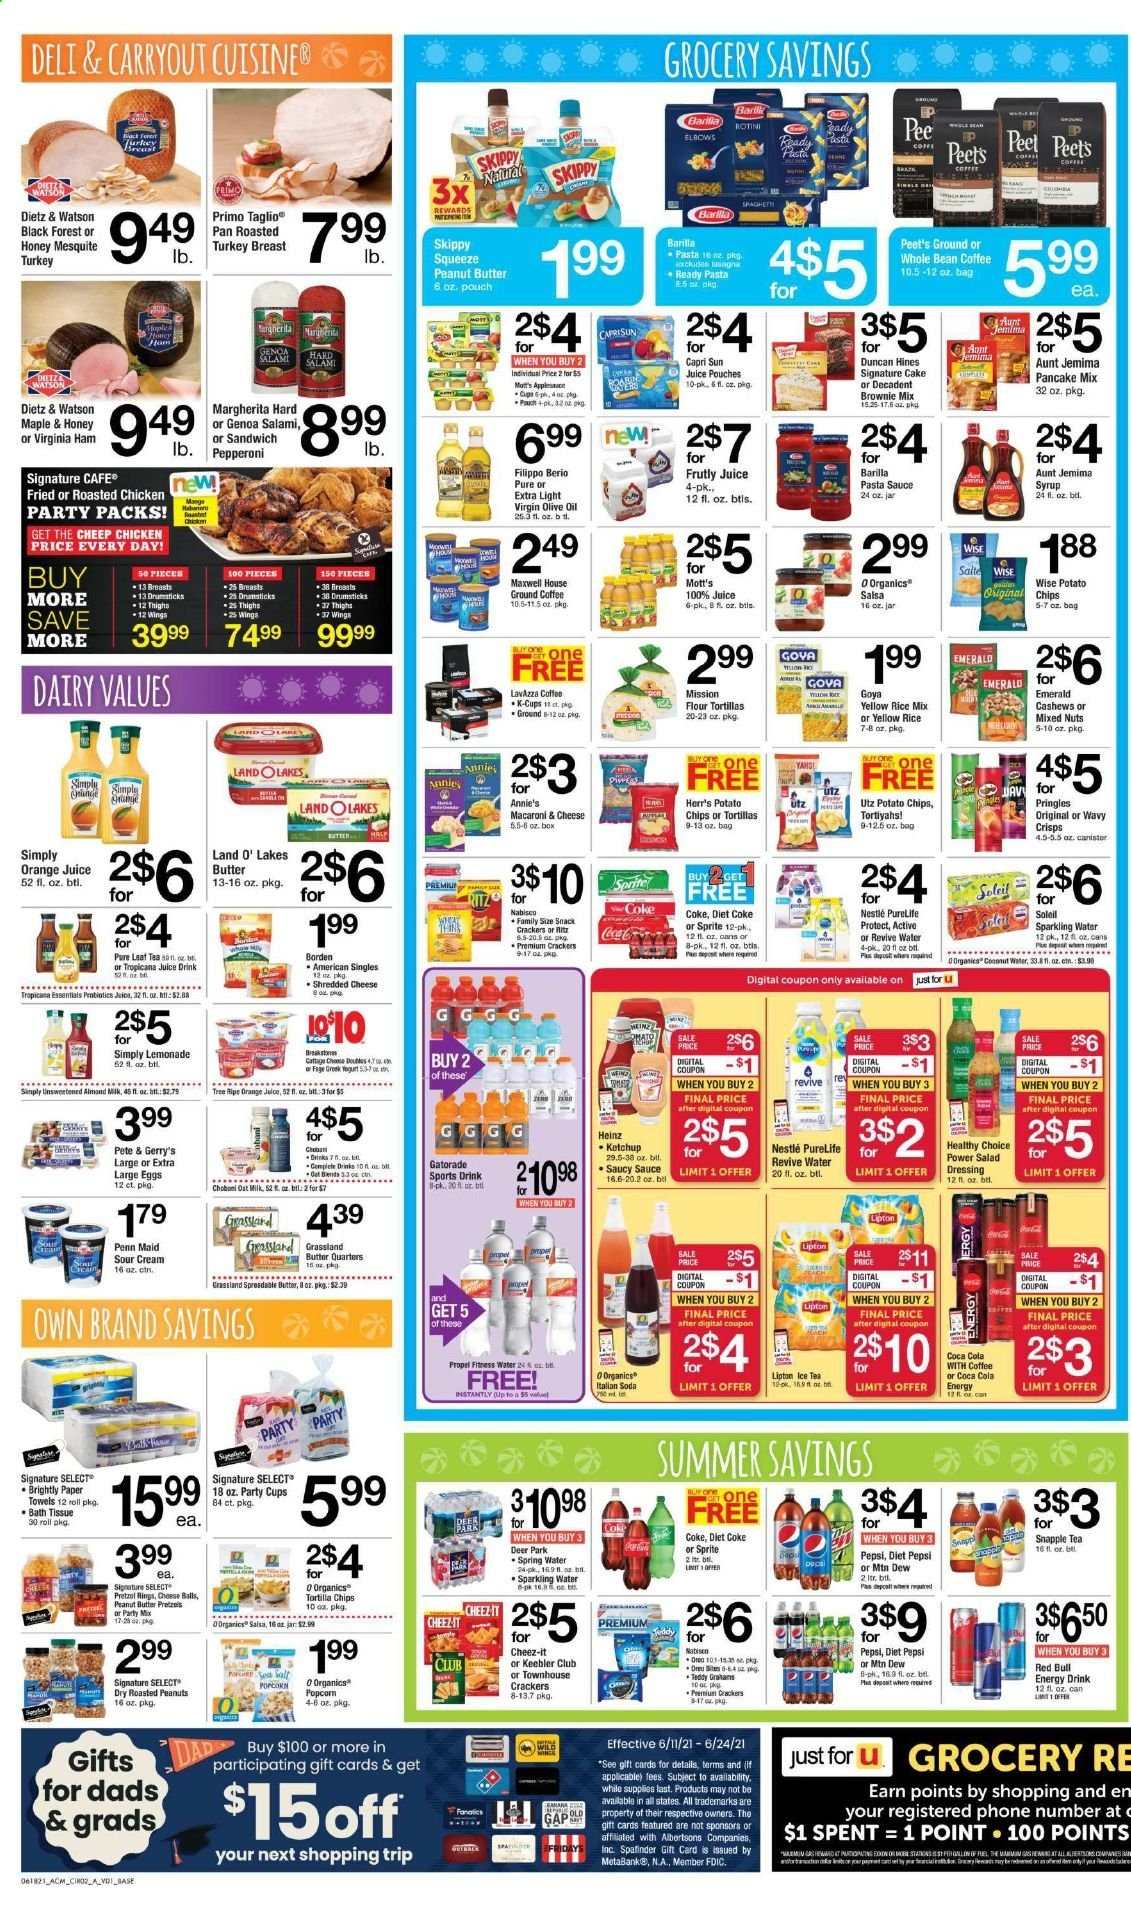 thumbnail - ACME Flyer - 06/18/2021 - 06/24/2021 - Sales products - pretzels, cake, flour tortillas, brownie mix, Mott's, macaroni & cheese, chicken roast, pasta sauce, sandwich, sauce, pancakes, Barilla, lasagna meal, Healthy Choice, Annie's, salami, ham, virginia ham, Dietz & Watson, pepperoni, shredded cheese, yoghurt, Chobani, almond milk, oat milk, large eggs, spreadable butter, sour cream, Nestlé, snack, crackers, Keebler, RITZ, tortilla chips, potato chips, Pringles, chips, popcorn, Cheez-It, Heinz, Goya, salad dressing, ketchup, dressing, salsa, olive oil, oil, peanut butter, syrup, cashews, roasted peanuts, peanuts, mixed nuts, Capri Sun, Coca-Cola, lemonade, Mountain Dew, Sprite, Pepsi, orange juice, juice, energy drink, Lipton, ice tea, Diet Pepsi, Diet Coke, Red Bull, Snapple, Gatorade, spring water, soda, sparkling water, Maxwell House, tea, coffee, ground coffee, coffee capsules, K-Cups, Lavazza, bath tissue, kitchen towels, paper towels, canister, pan, party cups, bag, teddy, probiotics. Page 2.